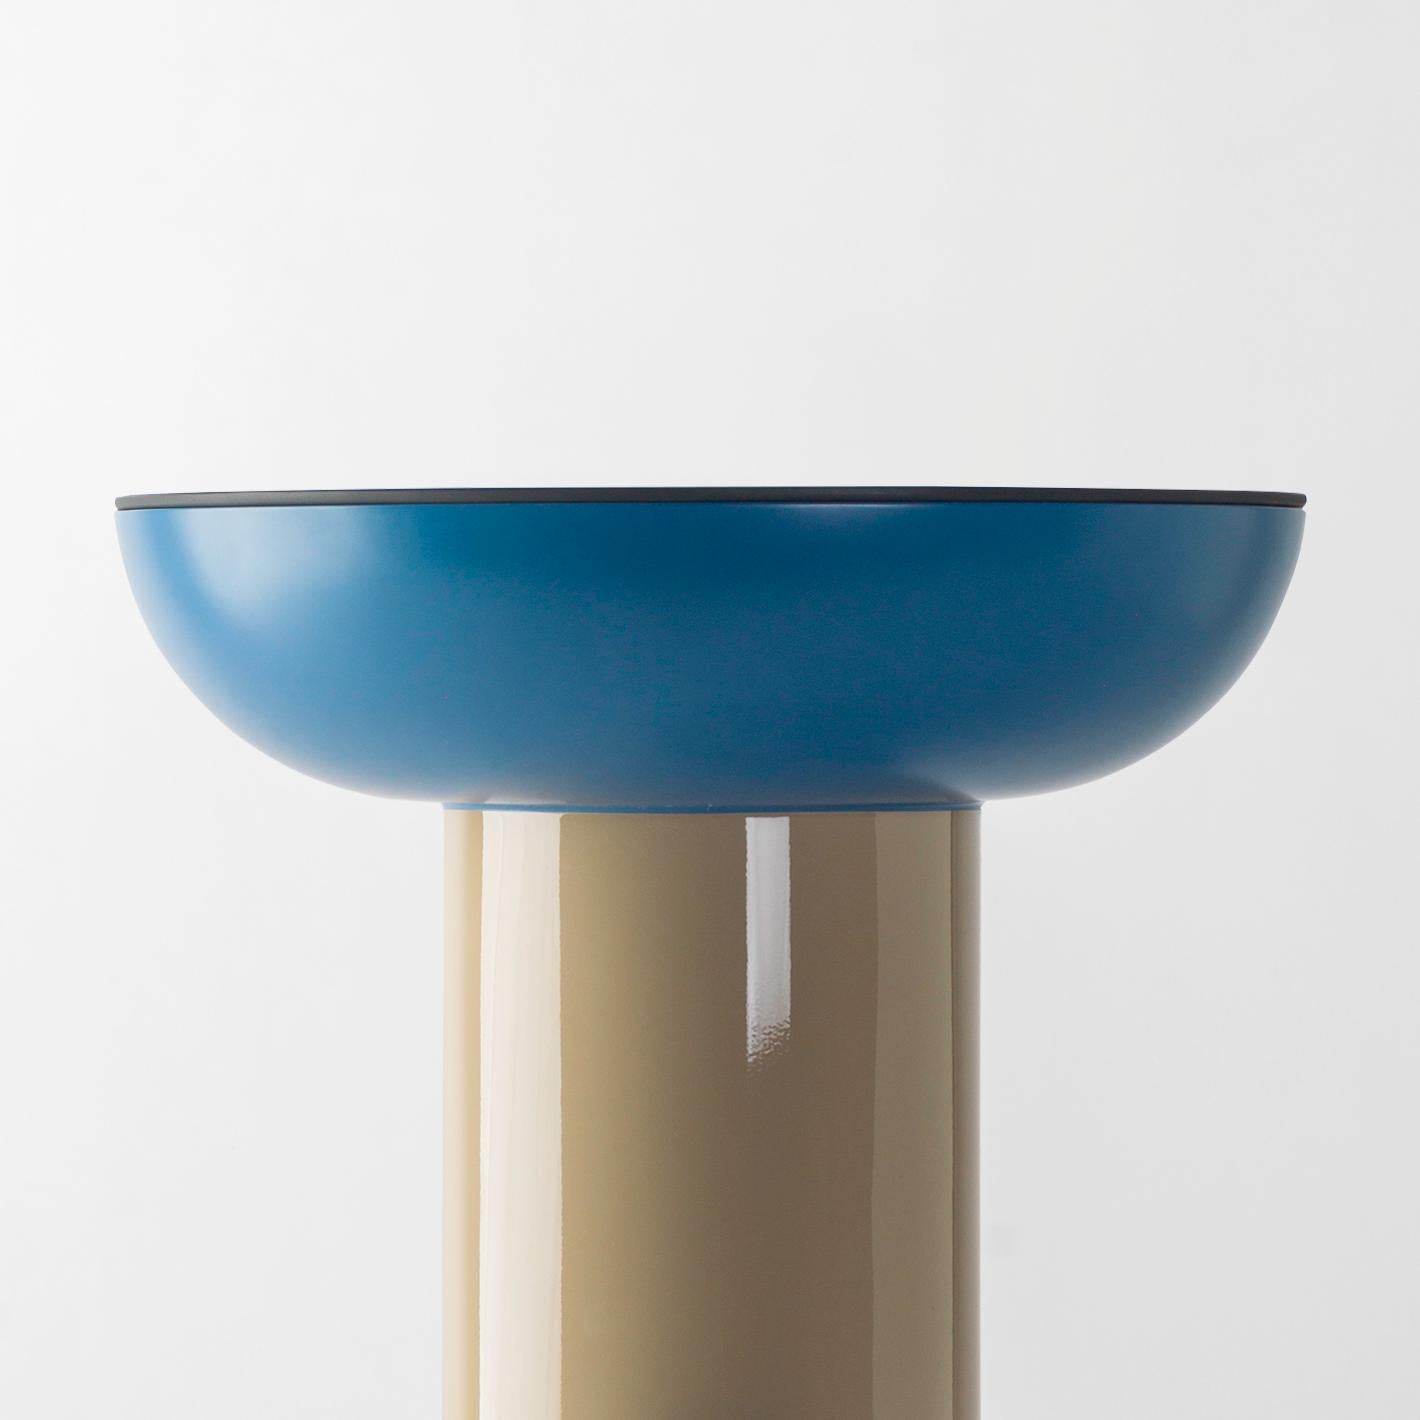 Multicolor Explorer #01 Table

Design by Jaime Hayon, 2019
Manufactured by BD Barcelona.

Laquered fibreglass body. Solid turned wooden legs and lacquered. Painted glass table top.

Measures: 40 Ø x 50 cm

- Glass: RAL 7021
- Top: RAL 5007